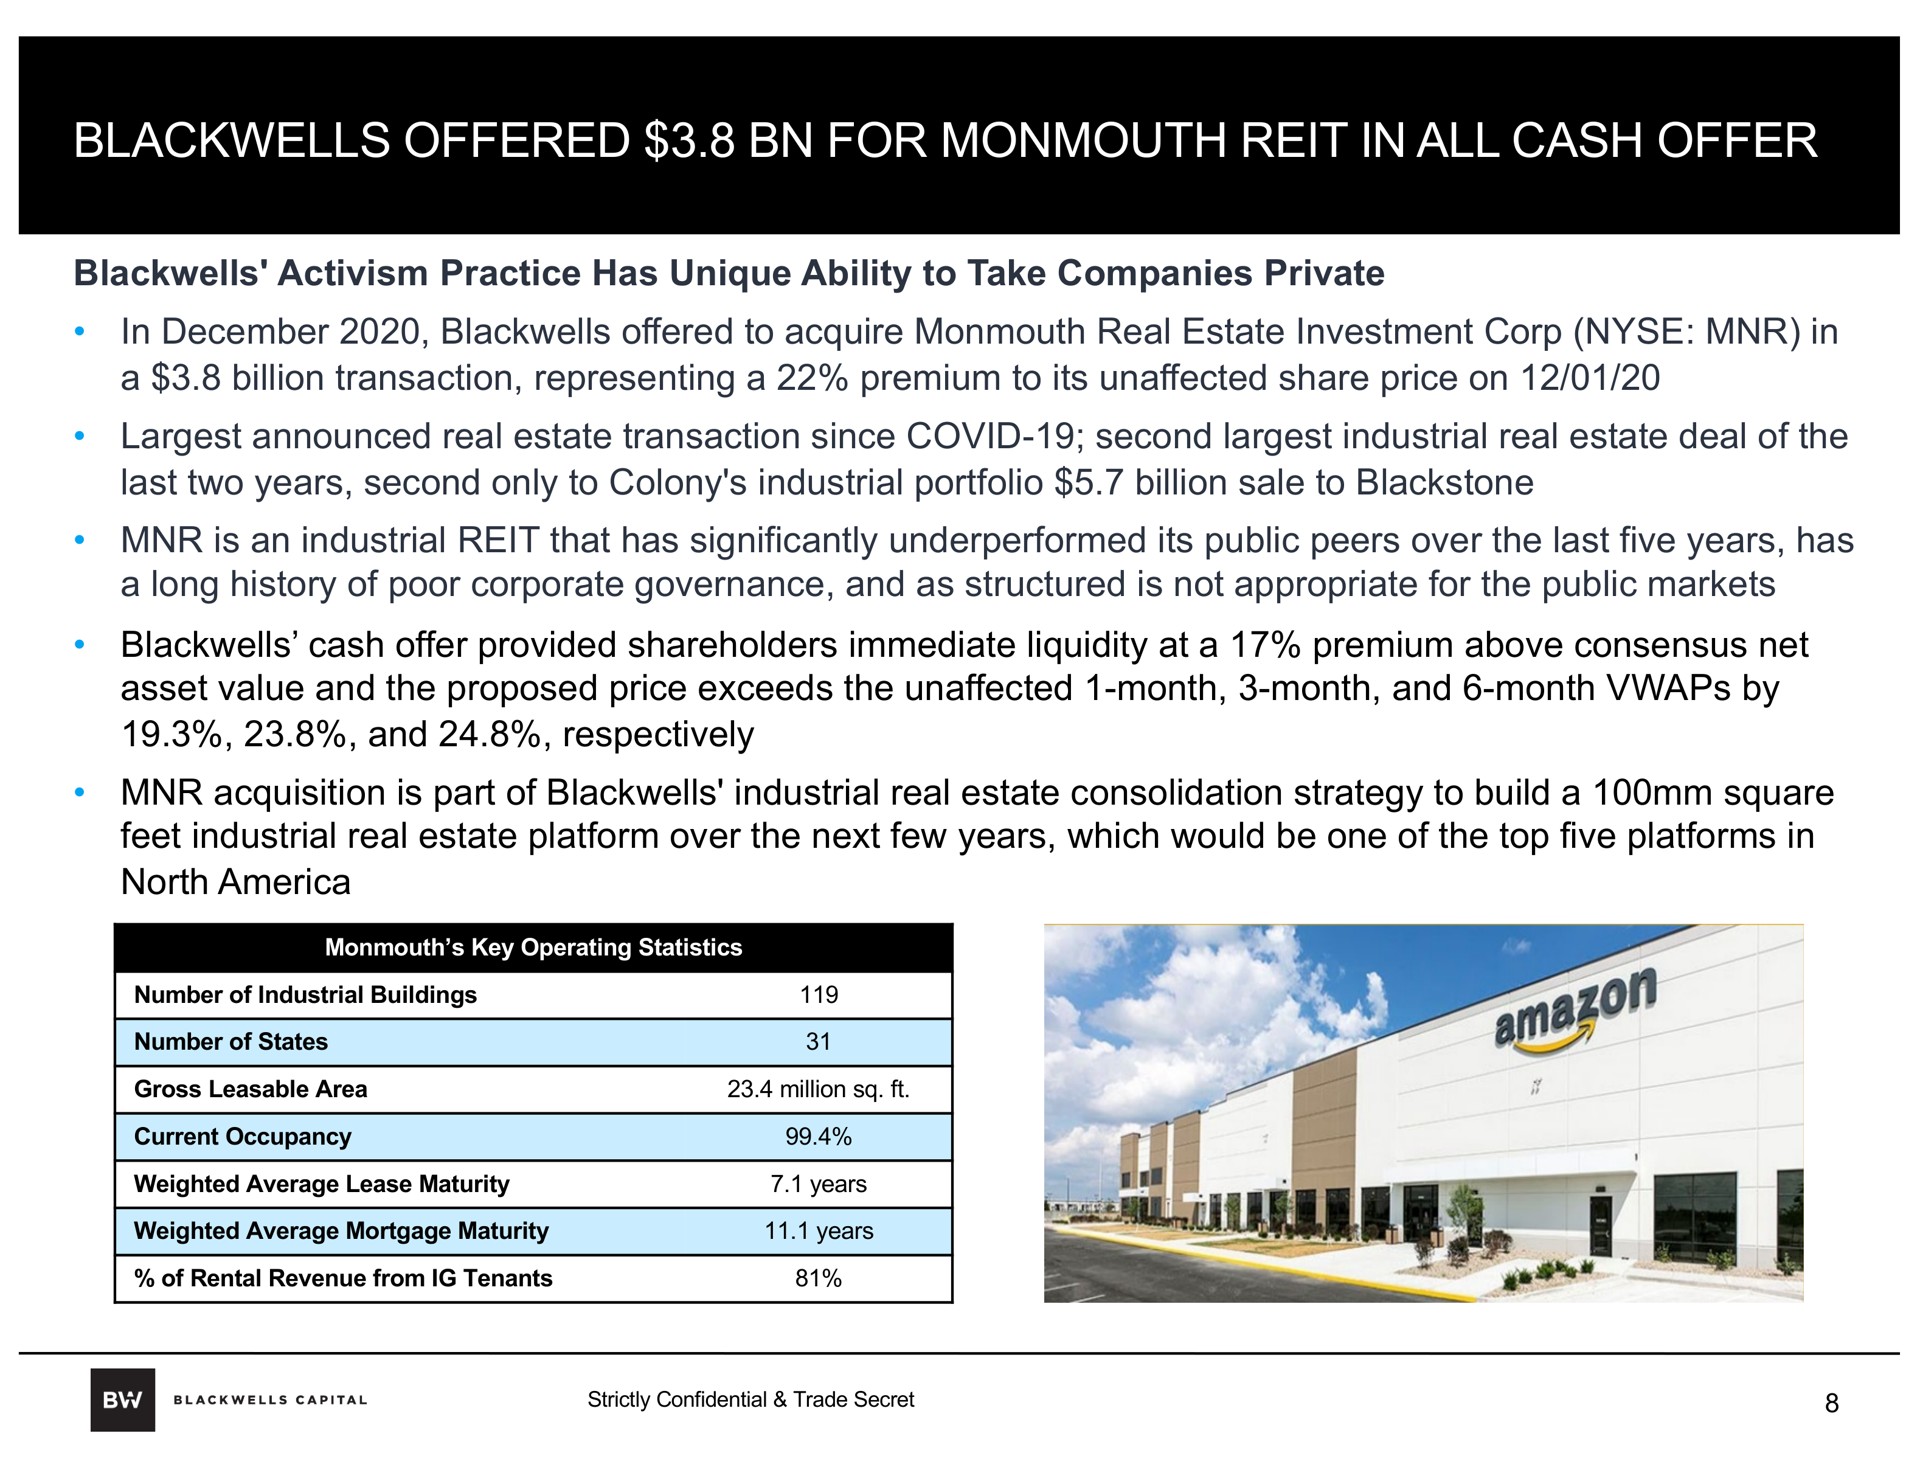 offered for reit in all cash offer | Blackwells Capital